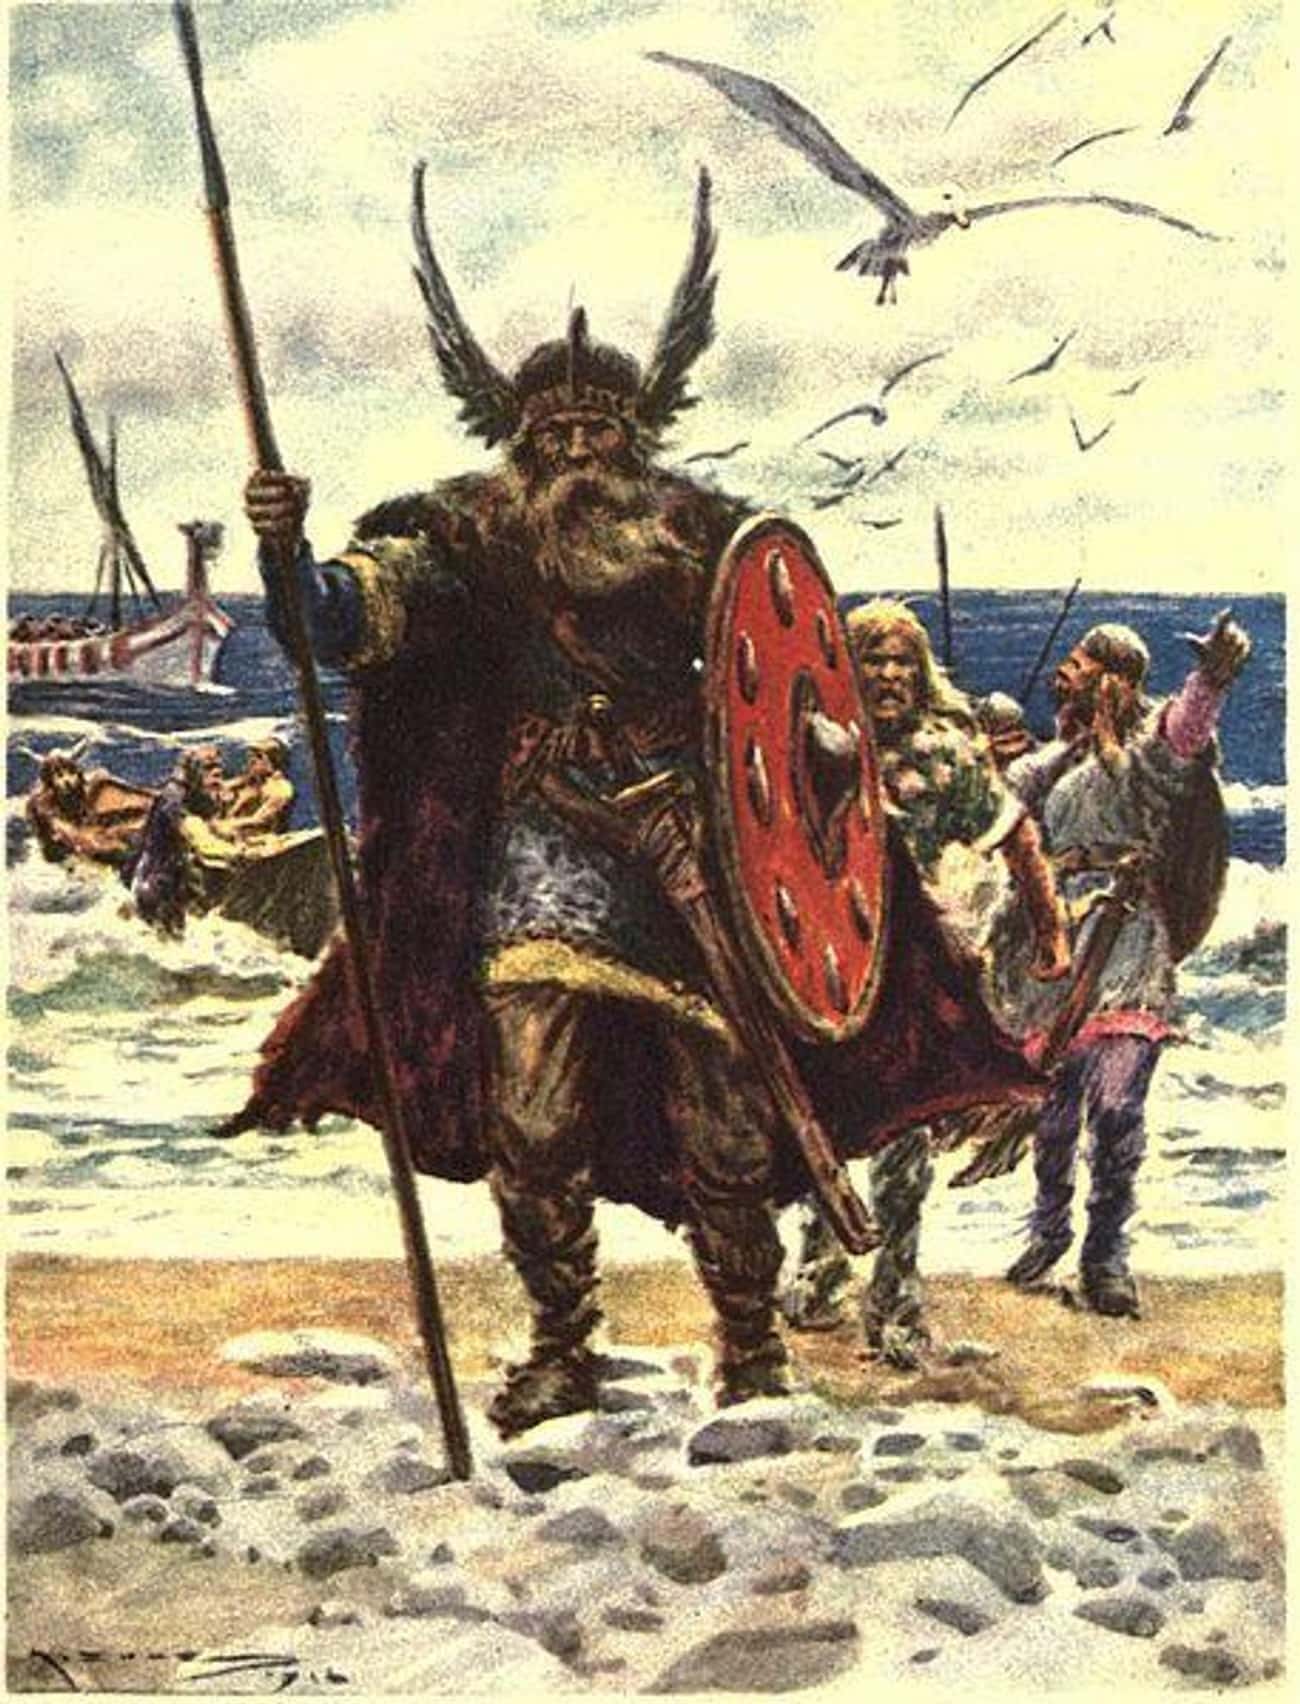 It's Possible The Vikings Never Intended To Stay In North America